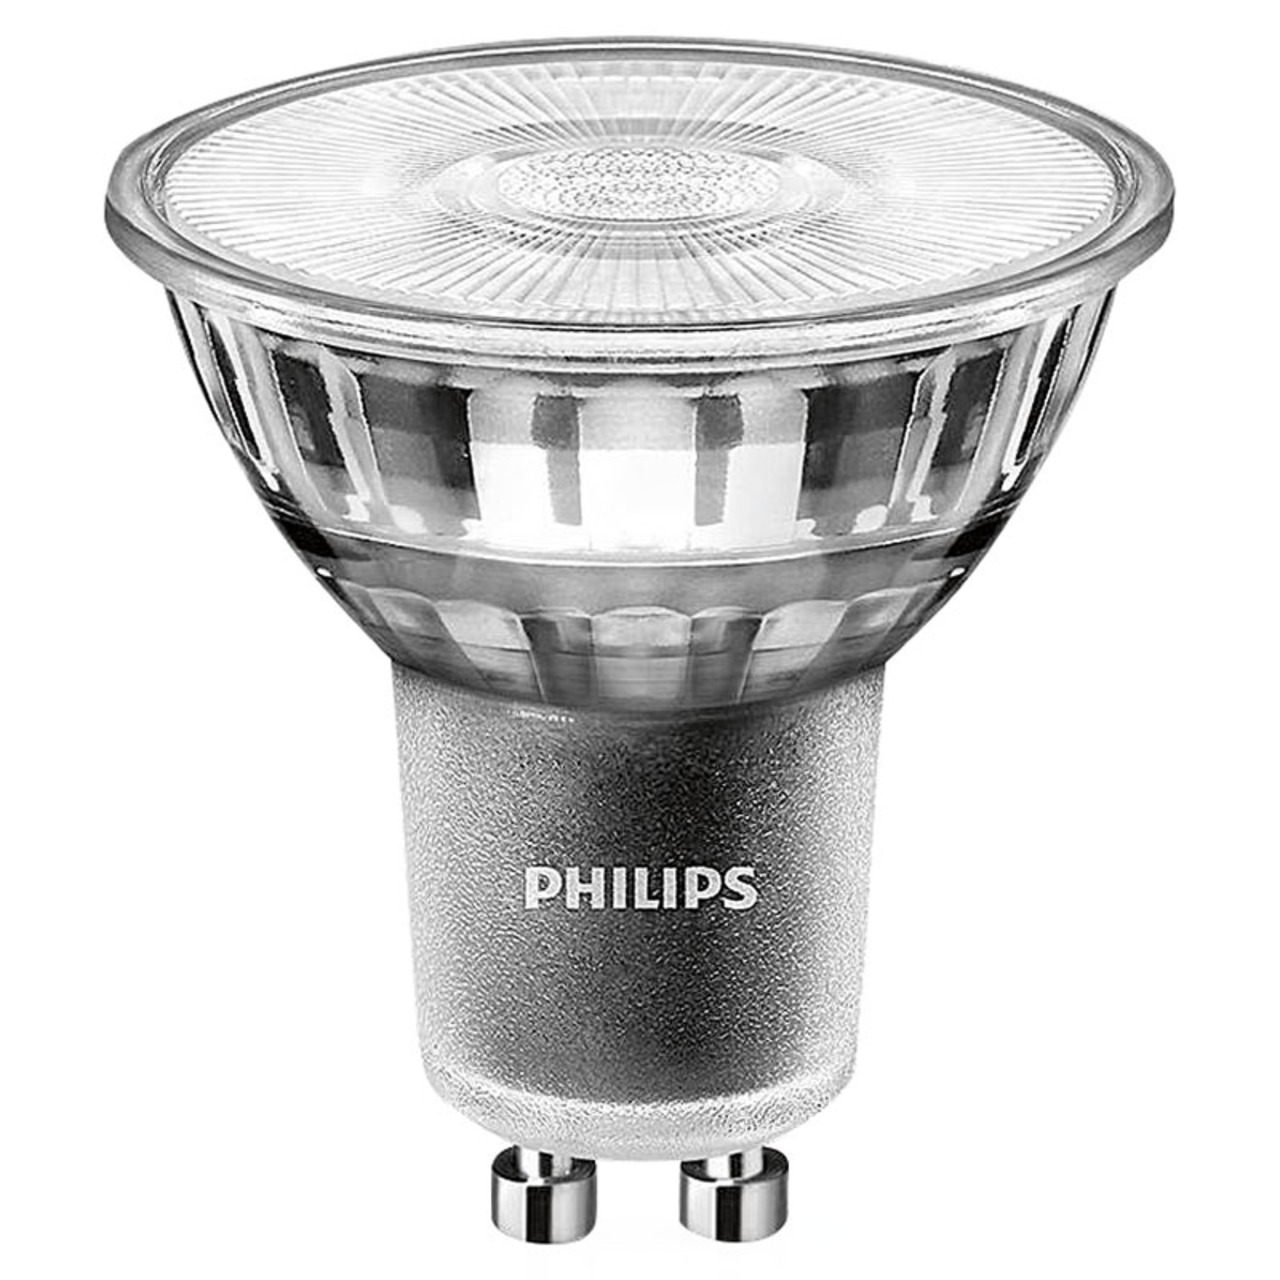 Philips MASTER ExpertColor 3-9-W-GU10-LED-Lampe- 265 lm- 97 Ra- 36 - 2700K- warmweiss- dimmbar